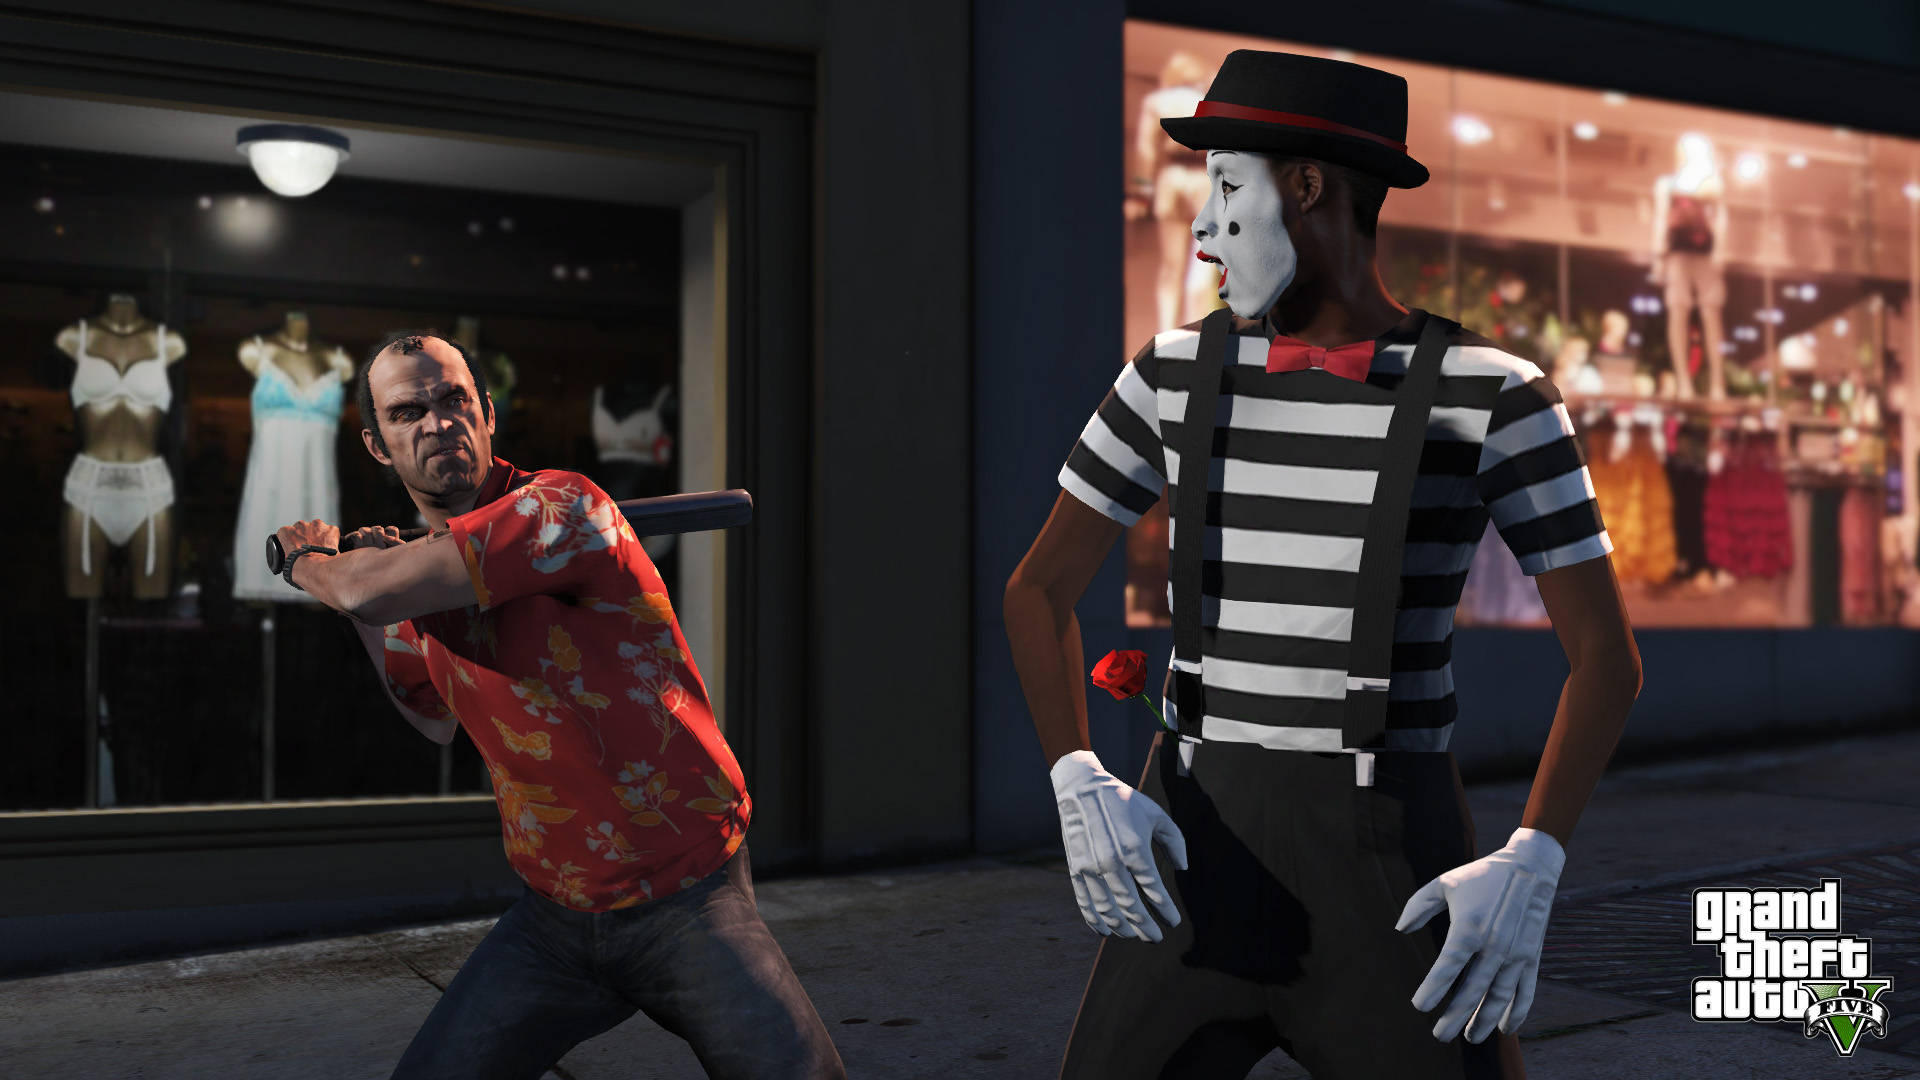 Trevor's Furious Attack On Mime In Stunning 4k Gta 5 Gaming Landscape Background